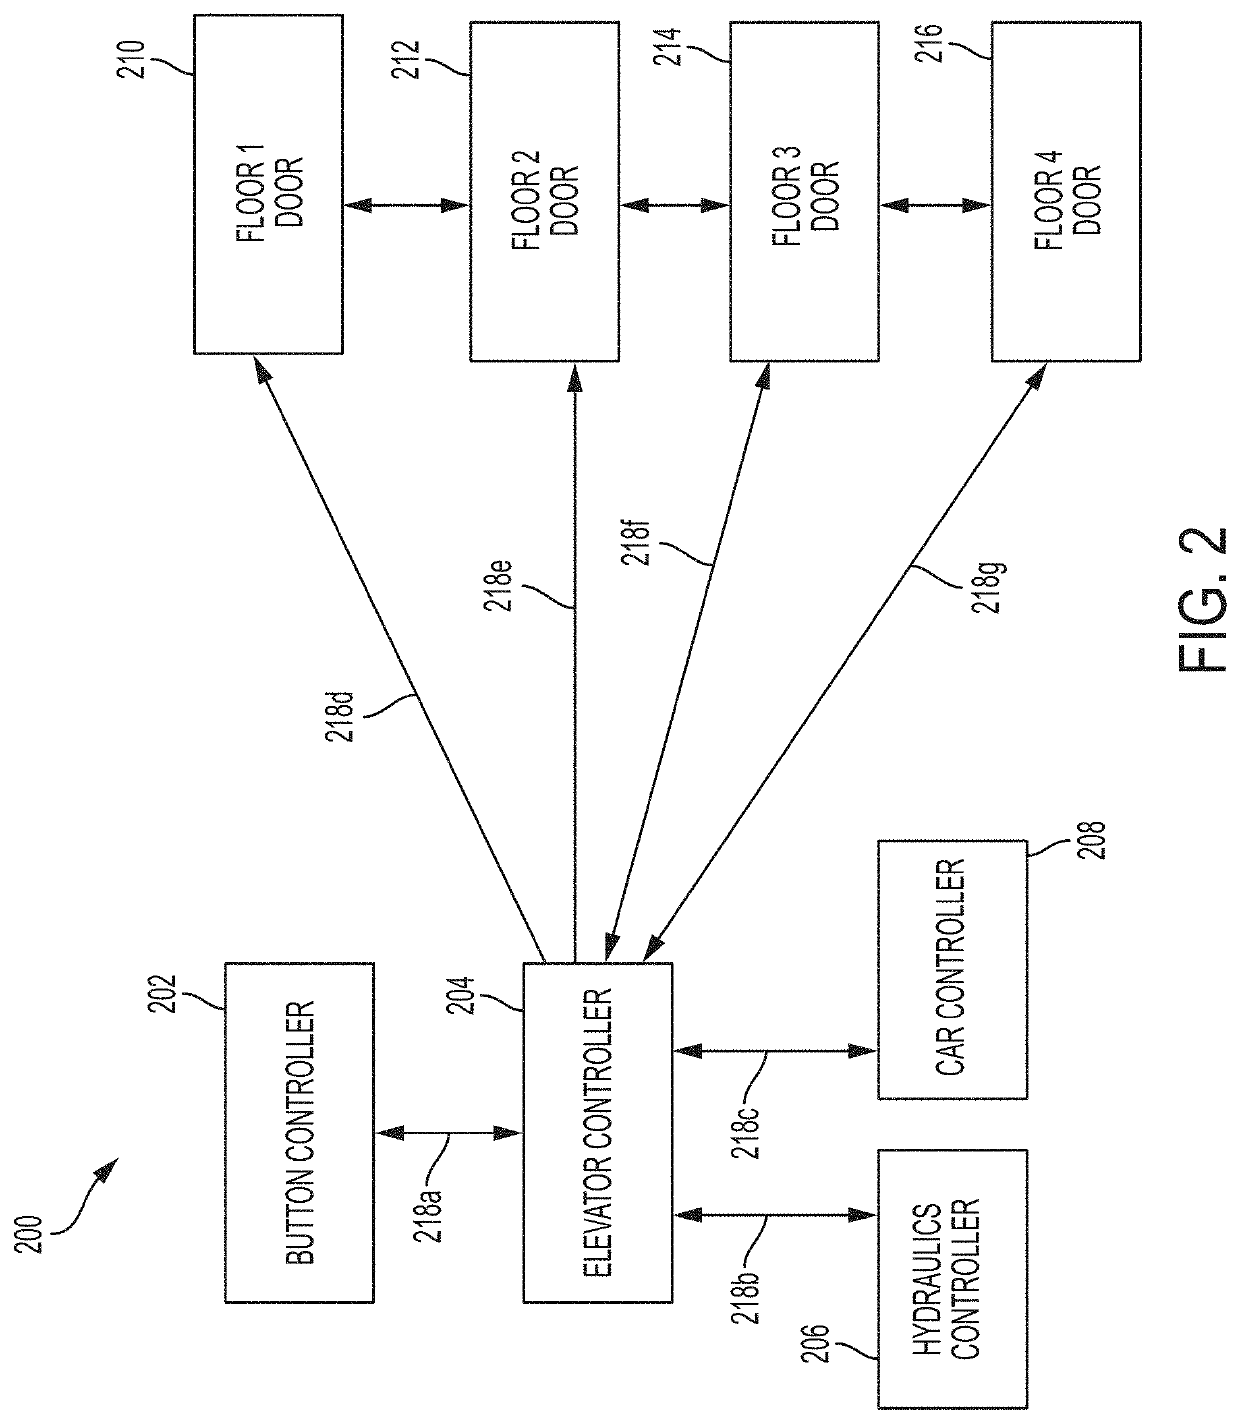 Systems and methods for declarative specification, detection, and evaluation of happened-before relationships